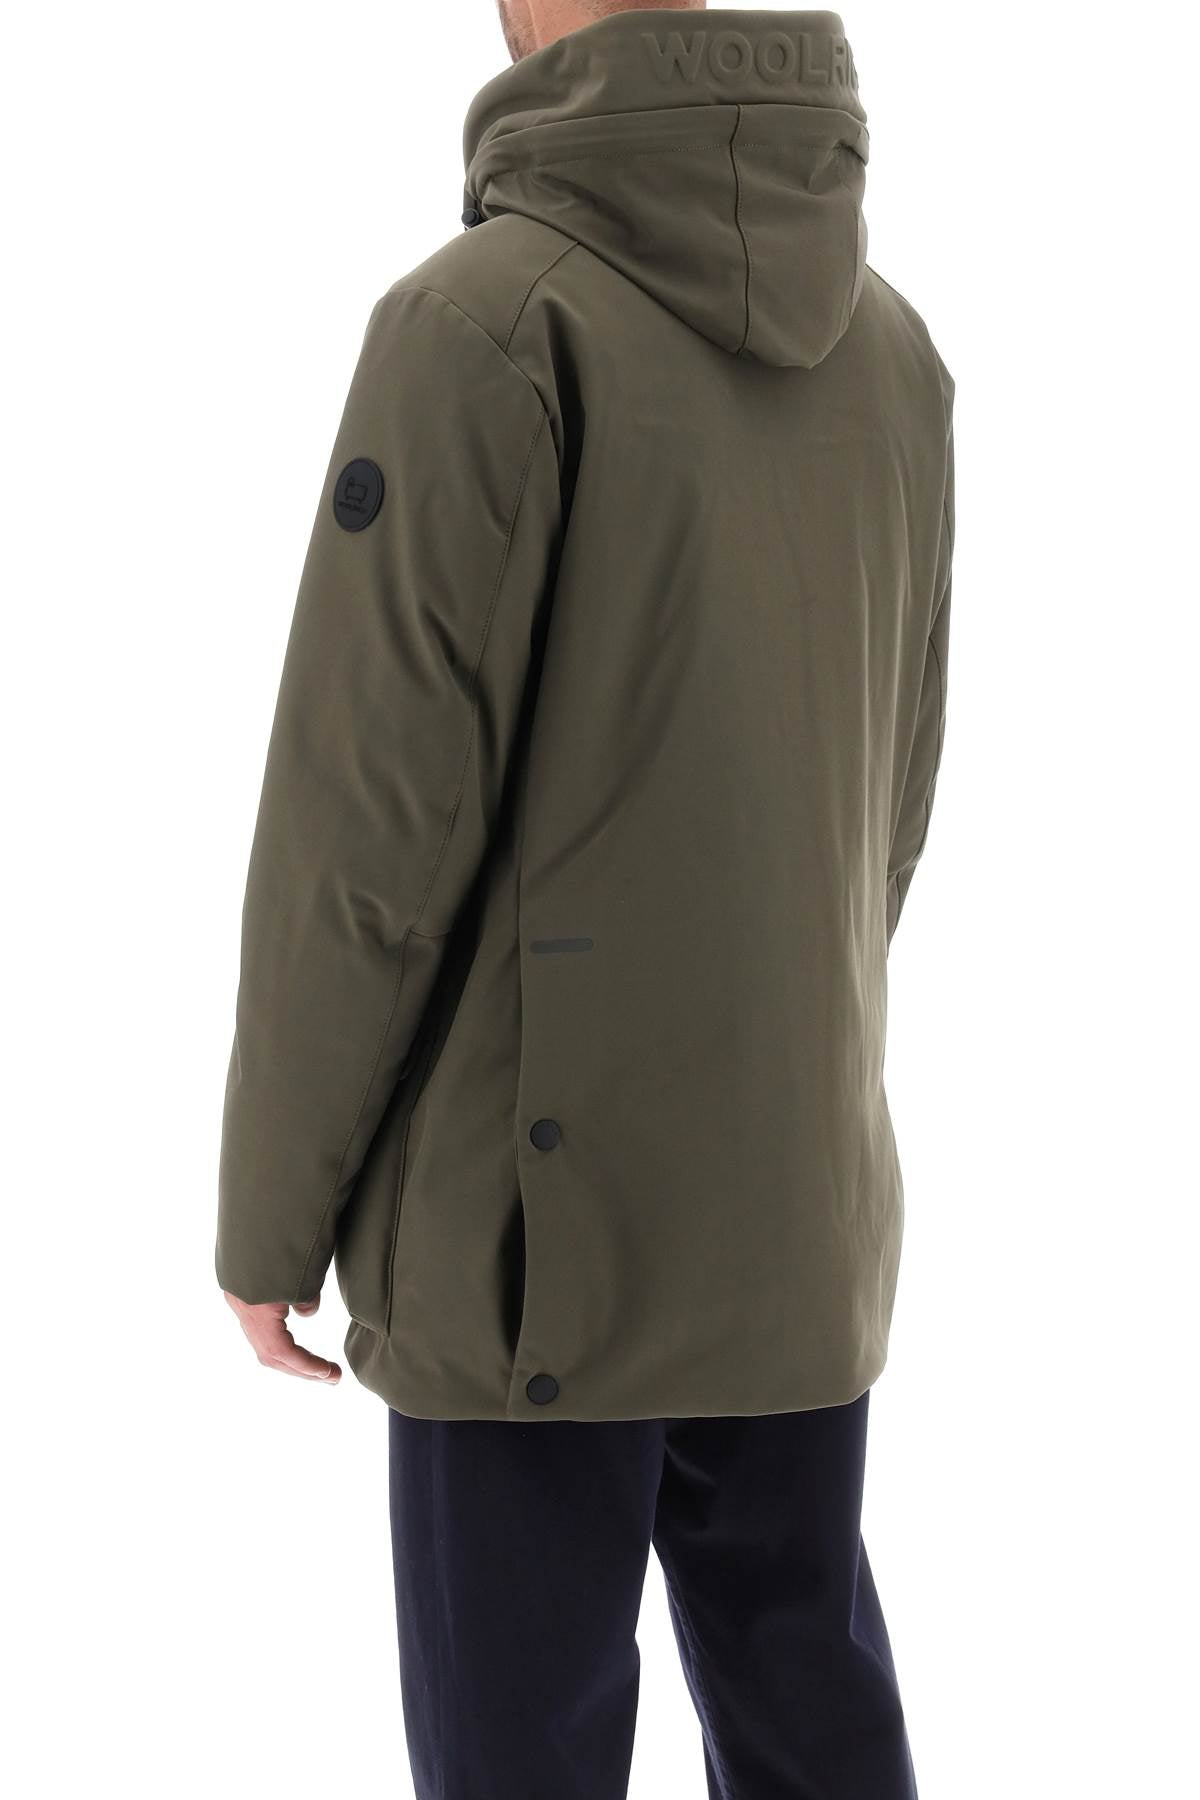 Woolrich parka in soft shell-2